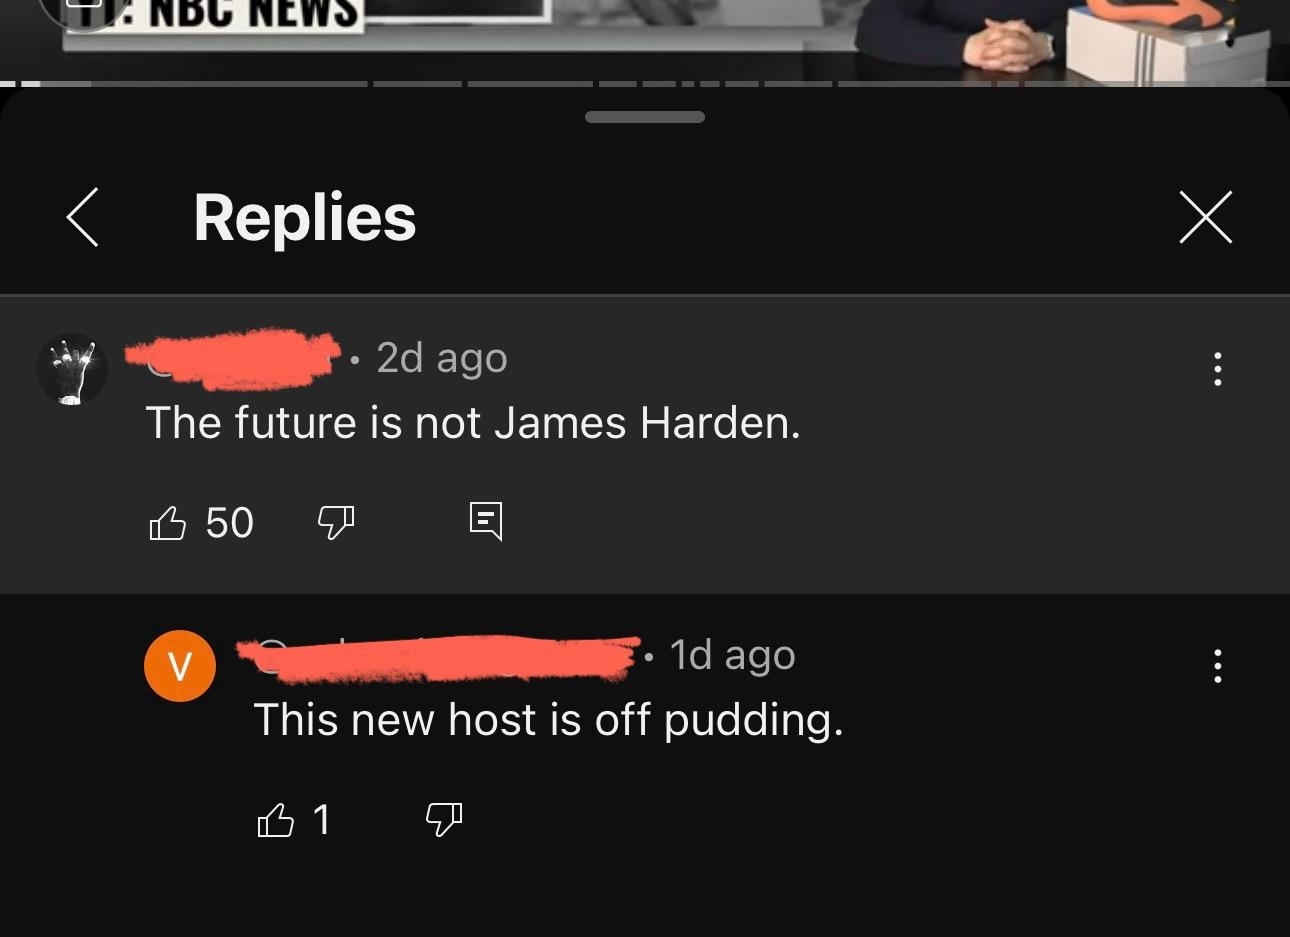 Two comments on a news video; the first criticizes a person named James Harden, the second humorously critiques the new host